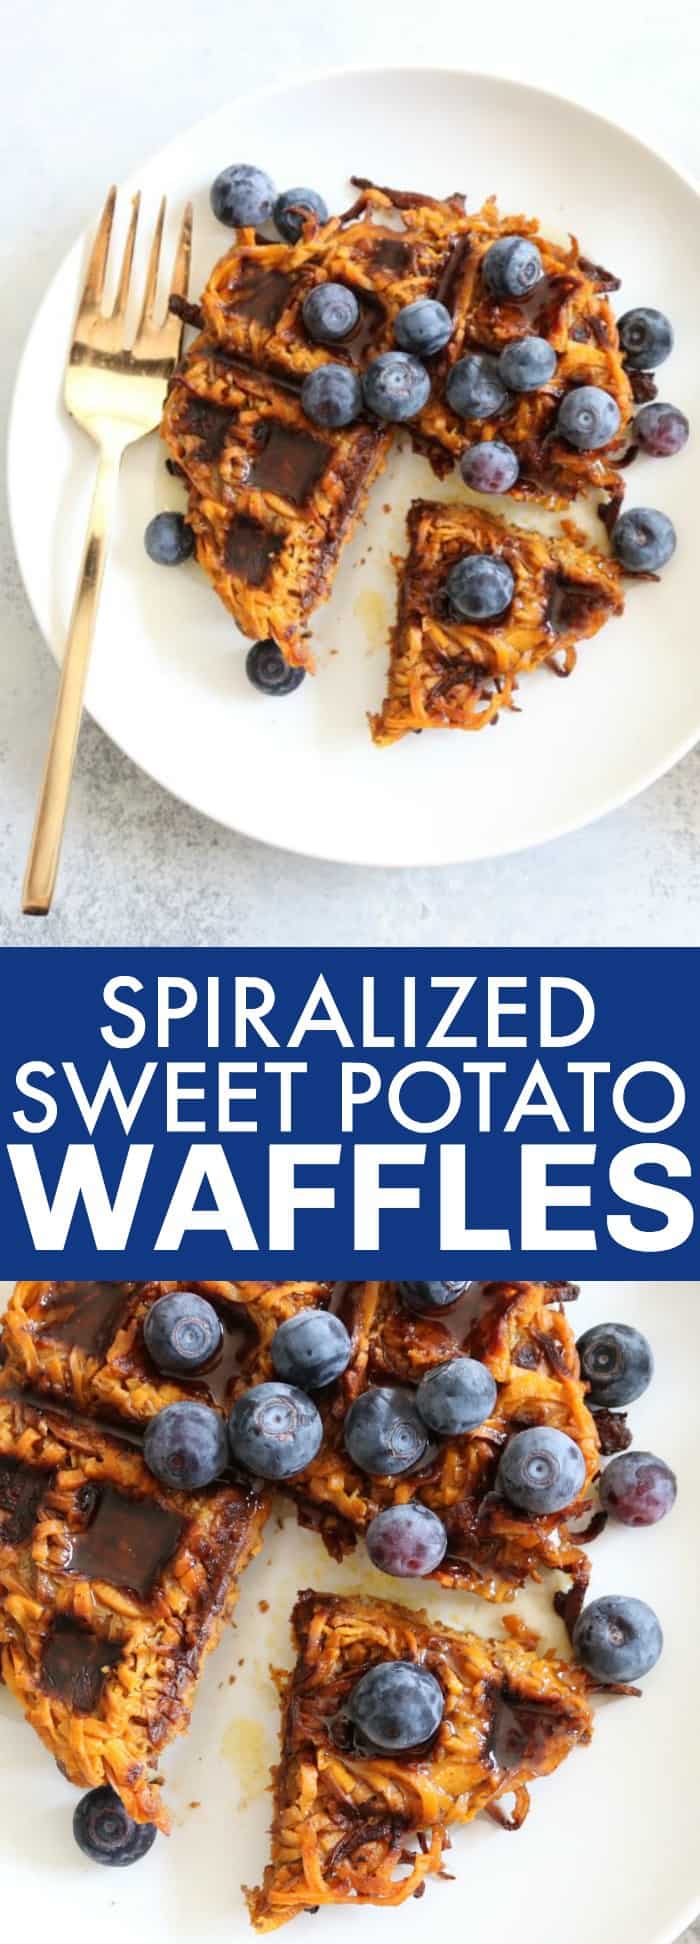 The BEST recipe for spiralized sweet potato waffles! This low carb and gluten free waffle is the BEST start to a lazy weekend! thetoastedpinenut.com #spiralized #sweetpotato #waffles #paleo #glutenfree #dairyfree #breakfast